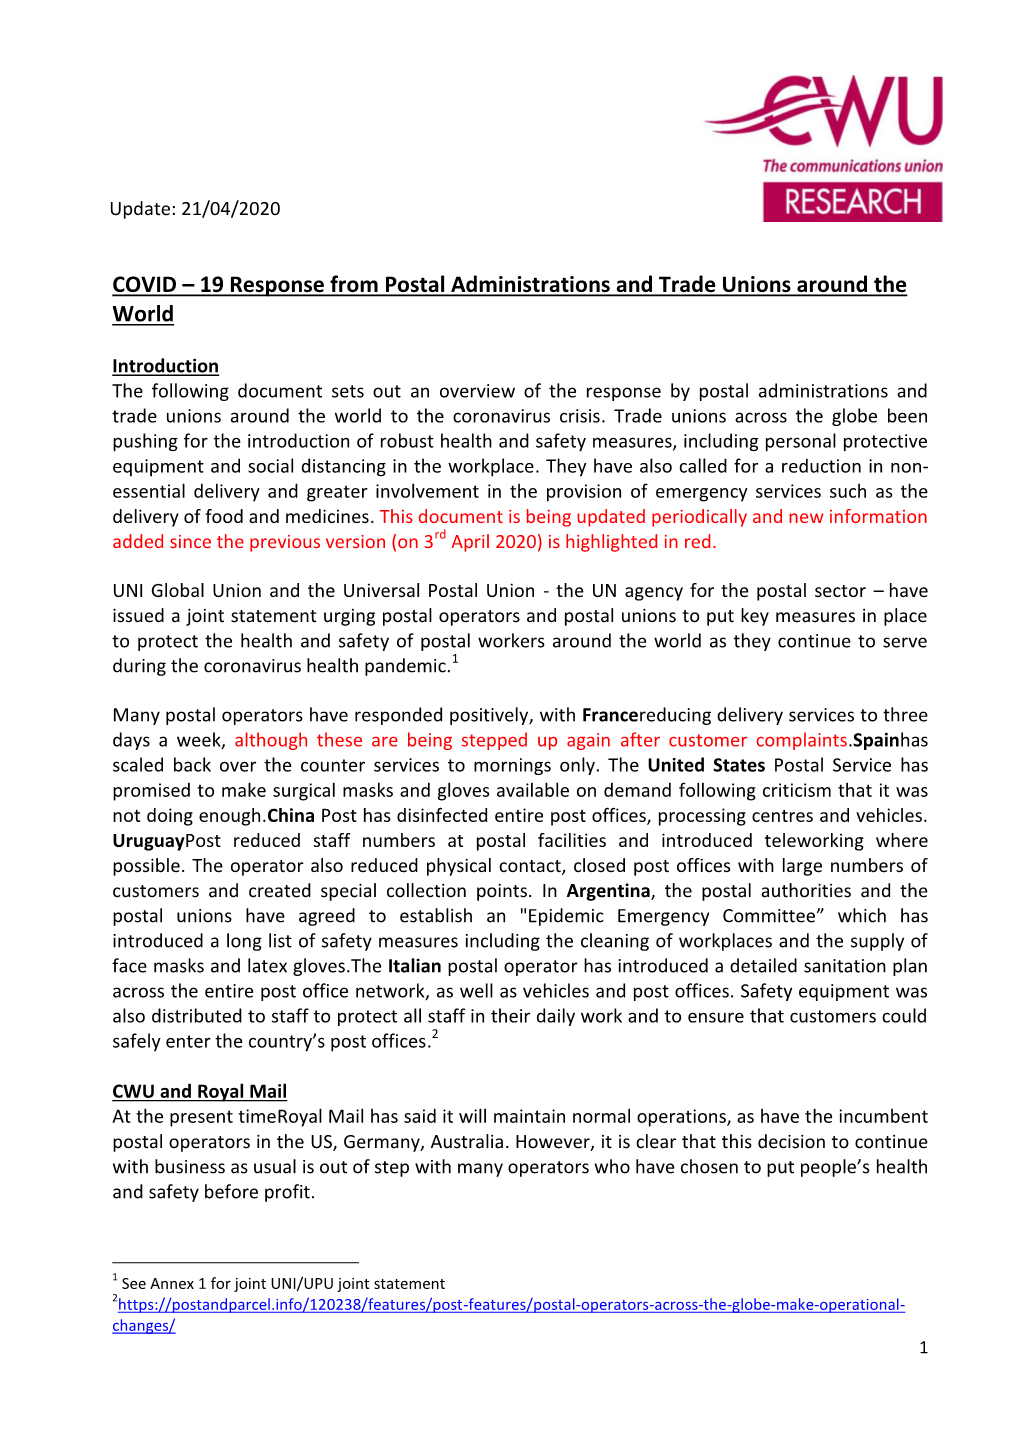 COVID – 19 Response from Postal Administrations and Trade Unions Around the World